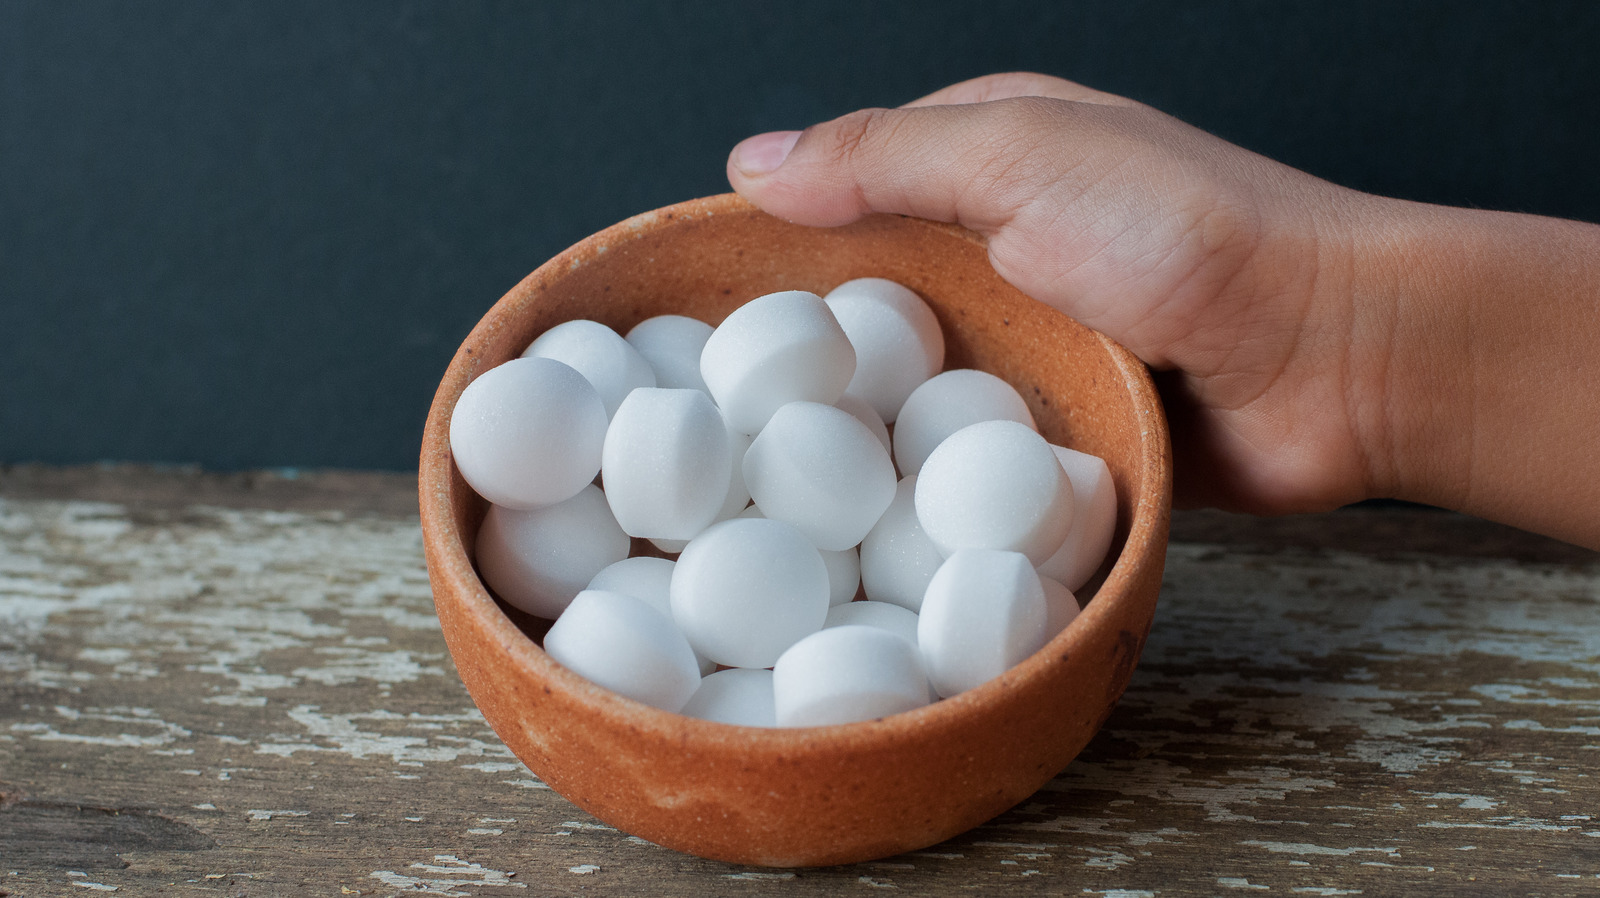 Mothballs Making You Sick? If You Can Smell Them- You Are Breathing Them